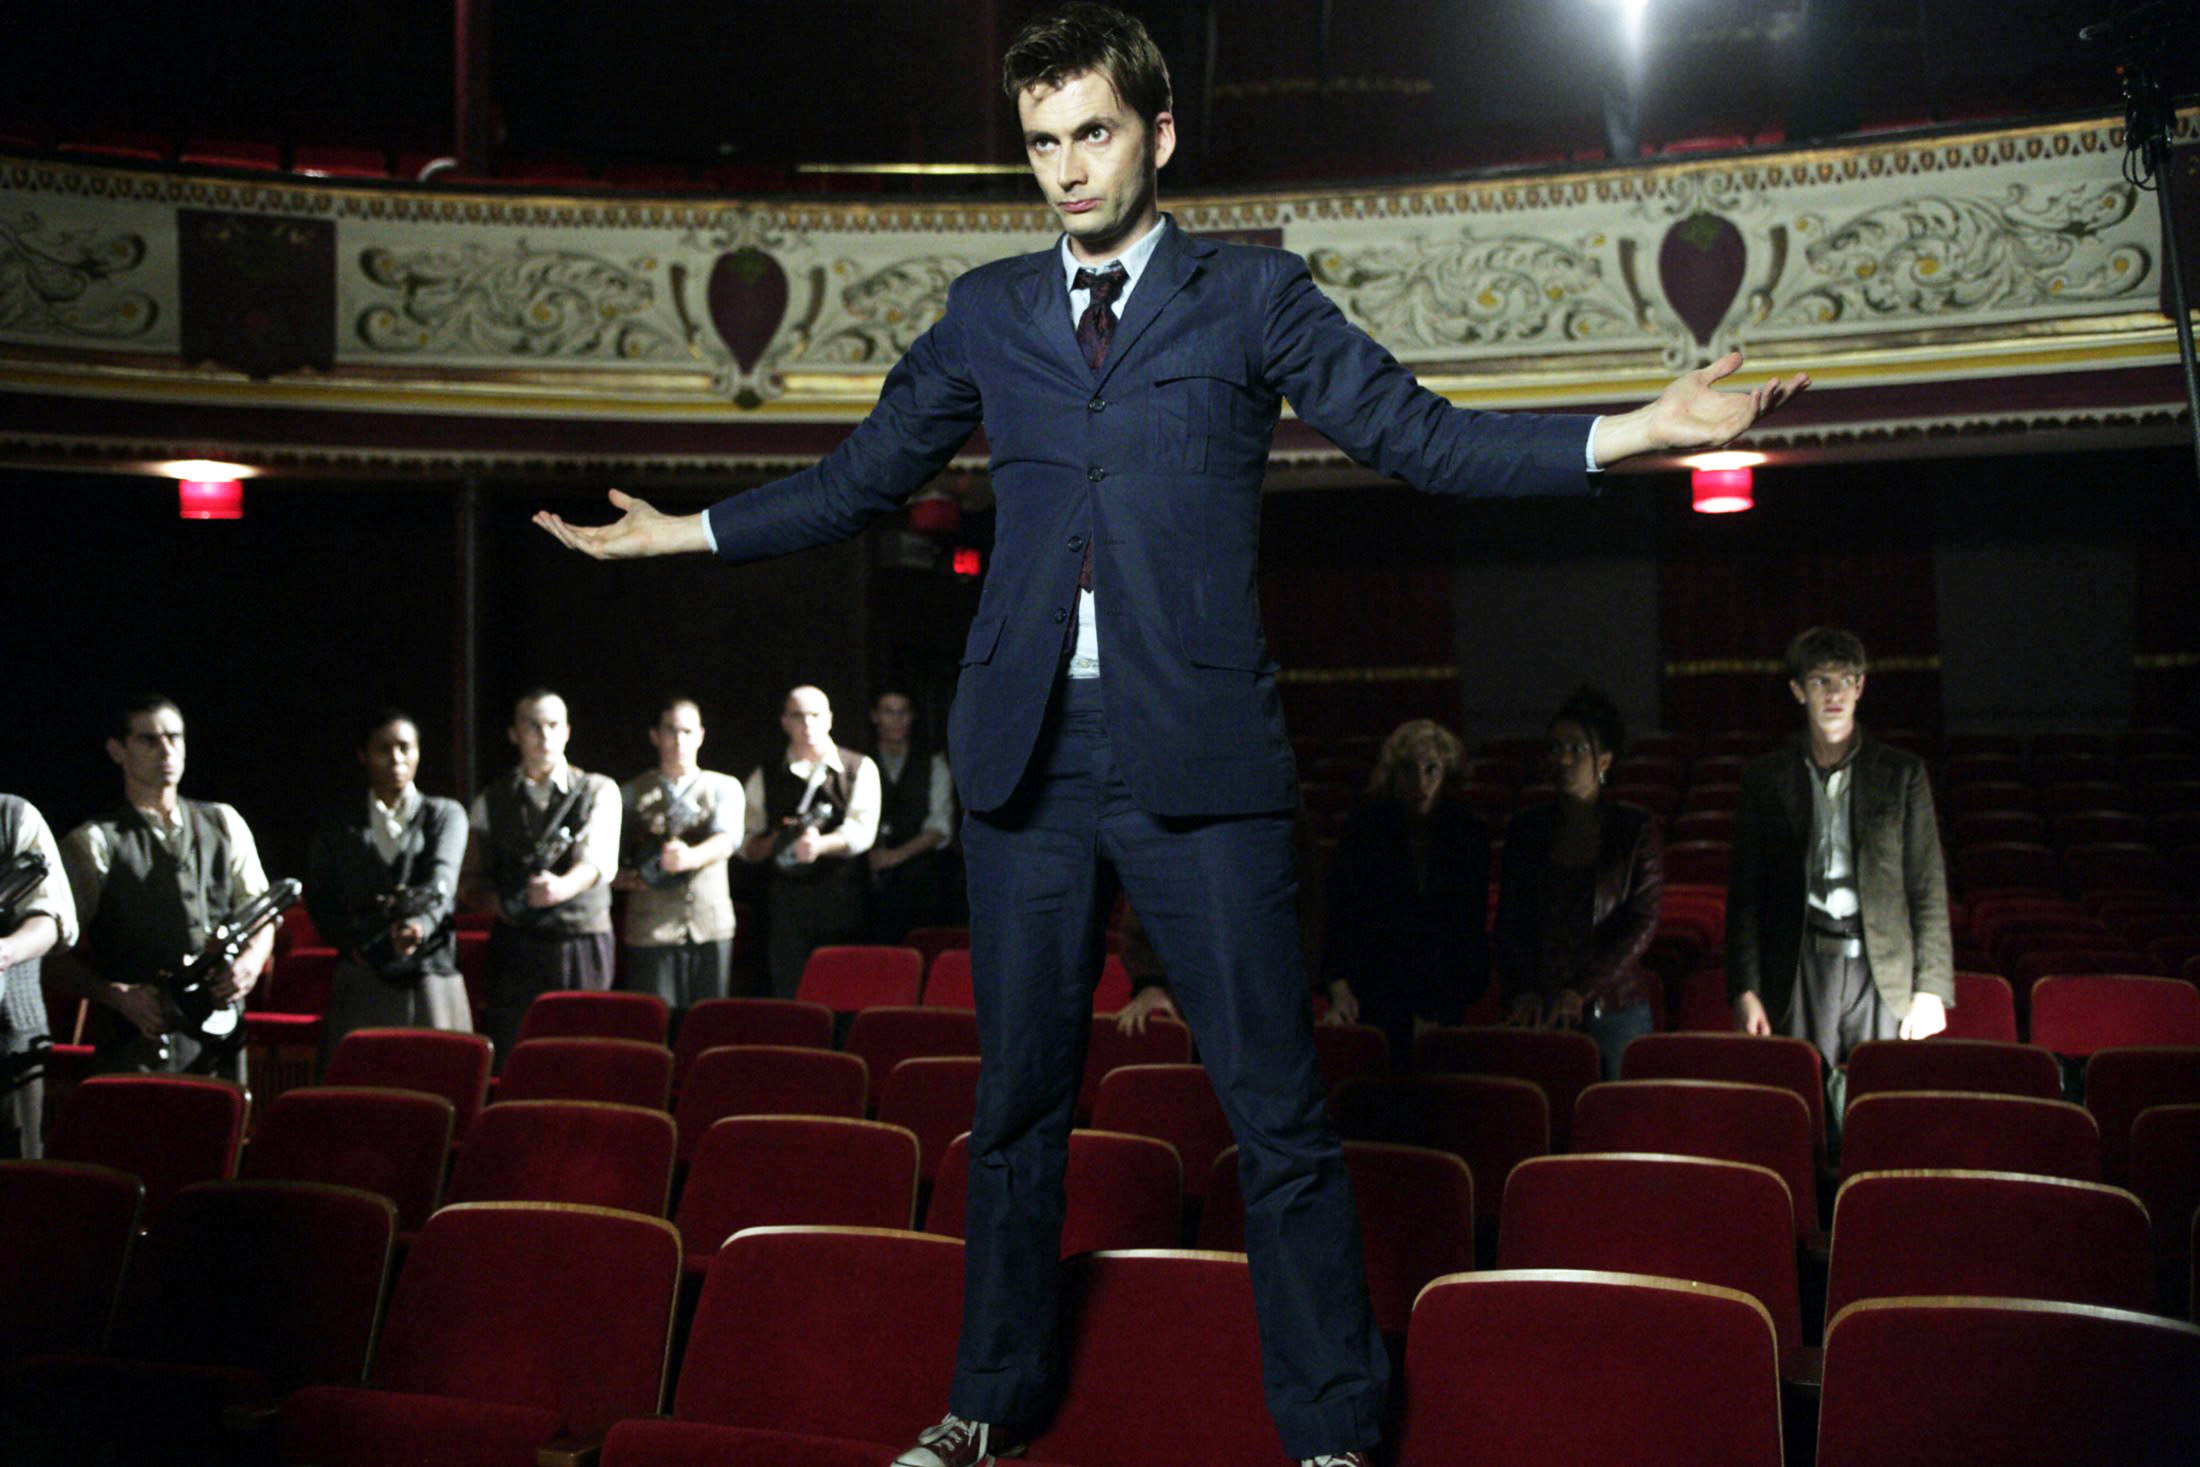 the doctor standing on theater seats